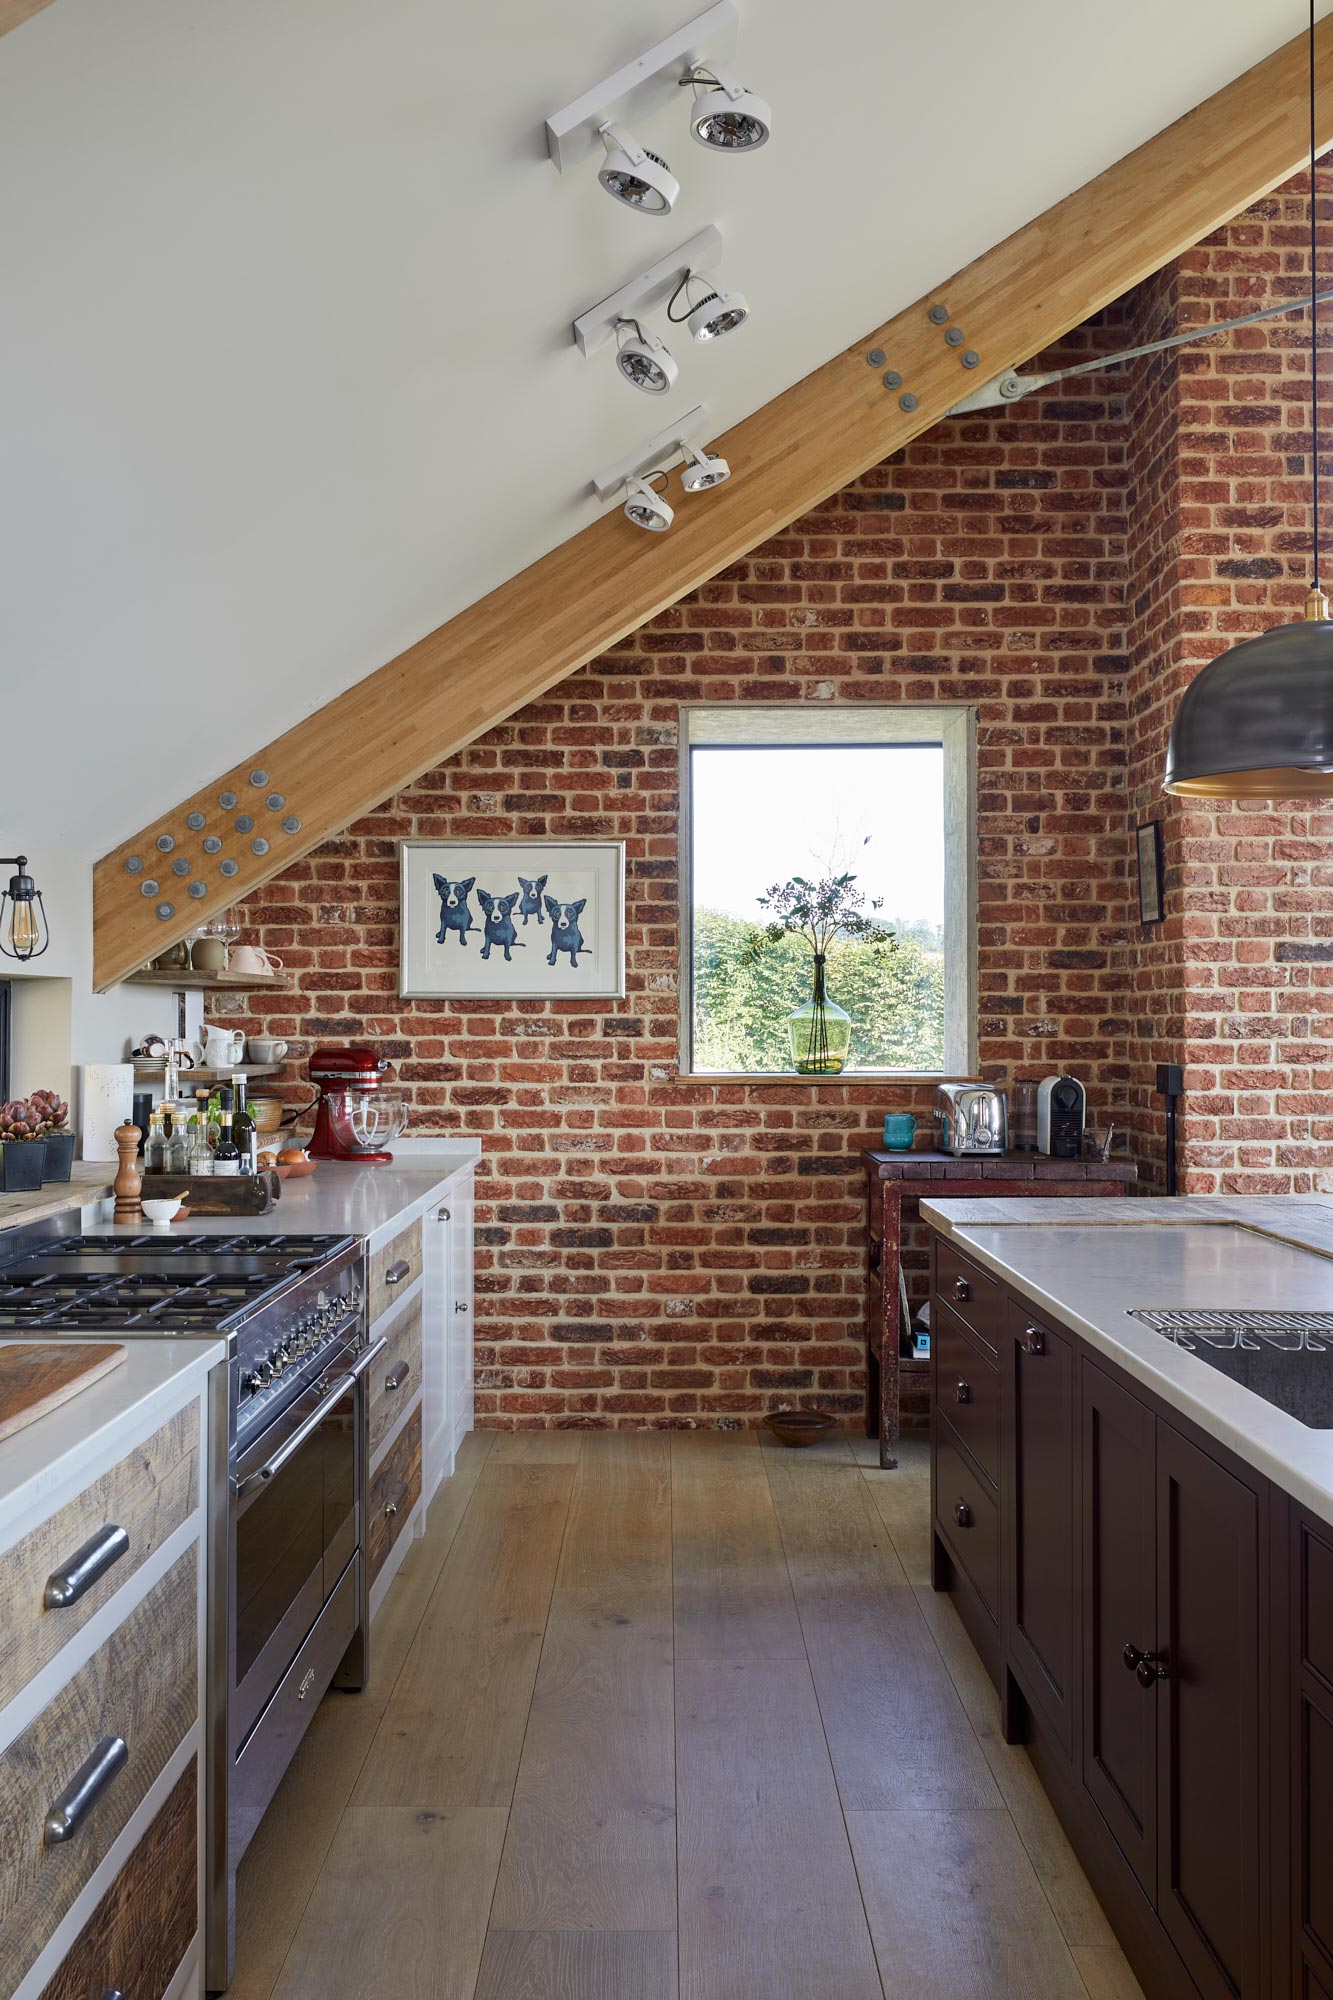 Exposed brick wall in kitchen with clean oak engineered flooring